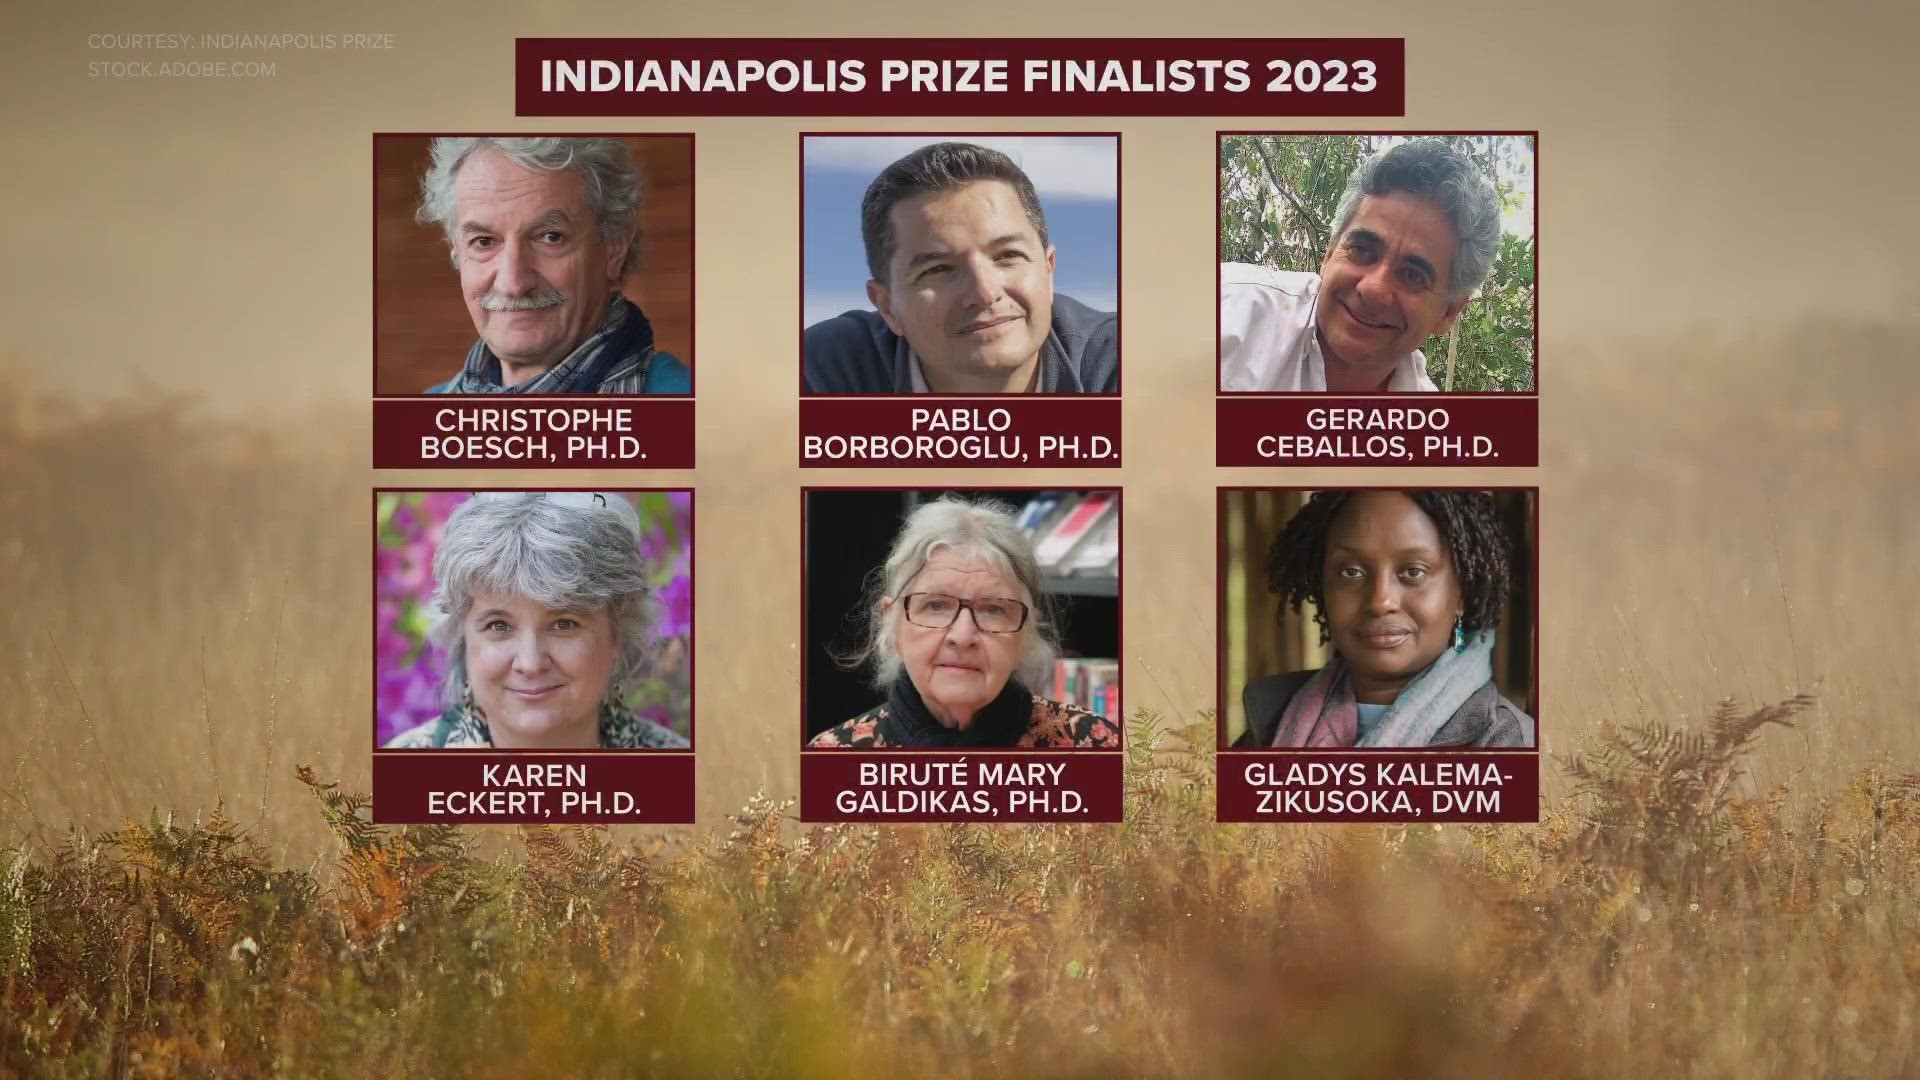 The winner of the Indianapolis Prize receives $250,000 and five finalists each receive $50,000.